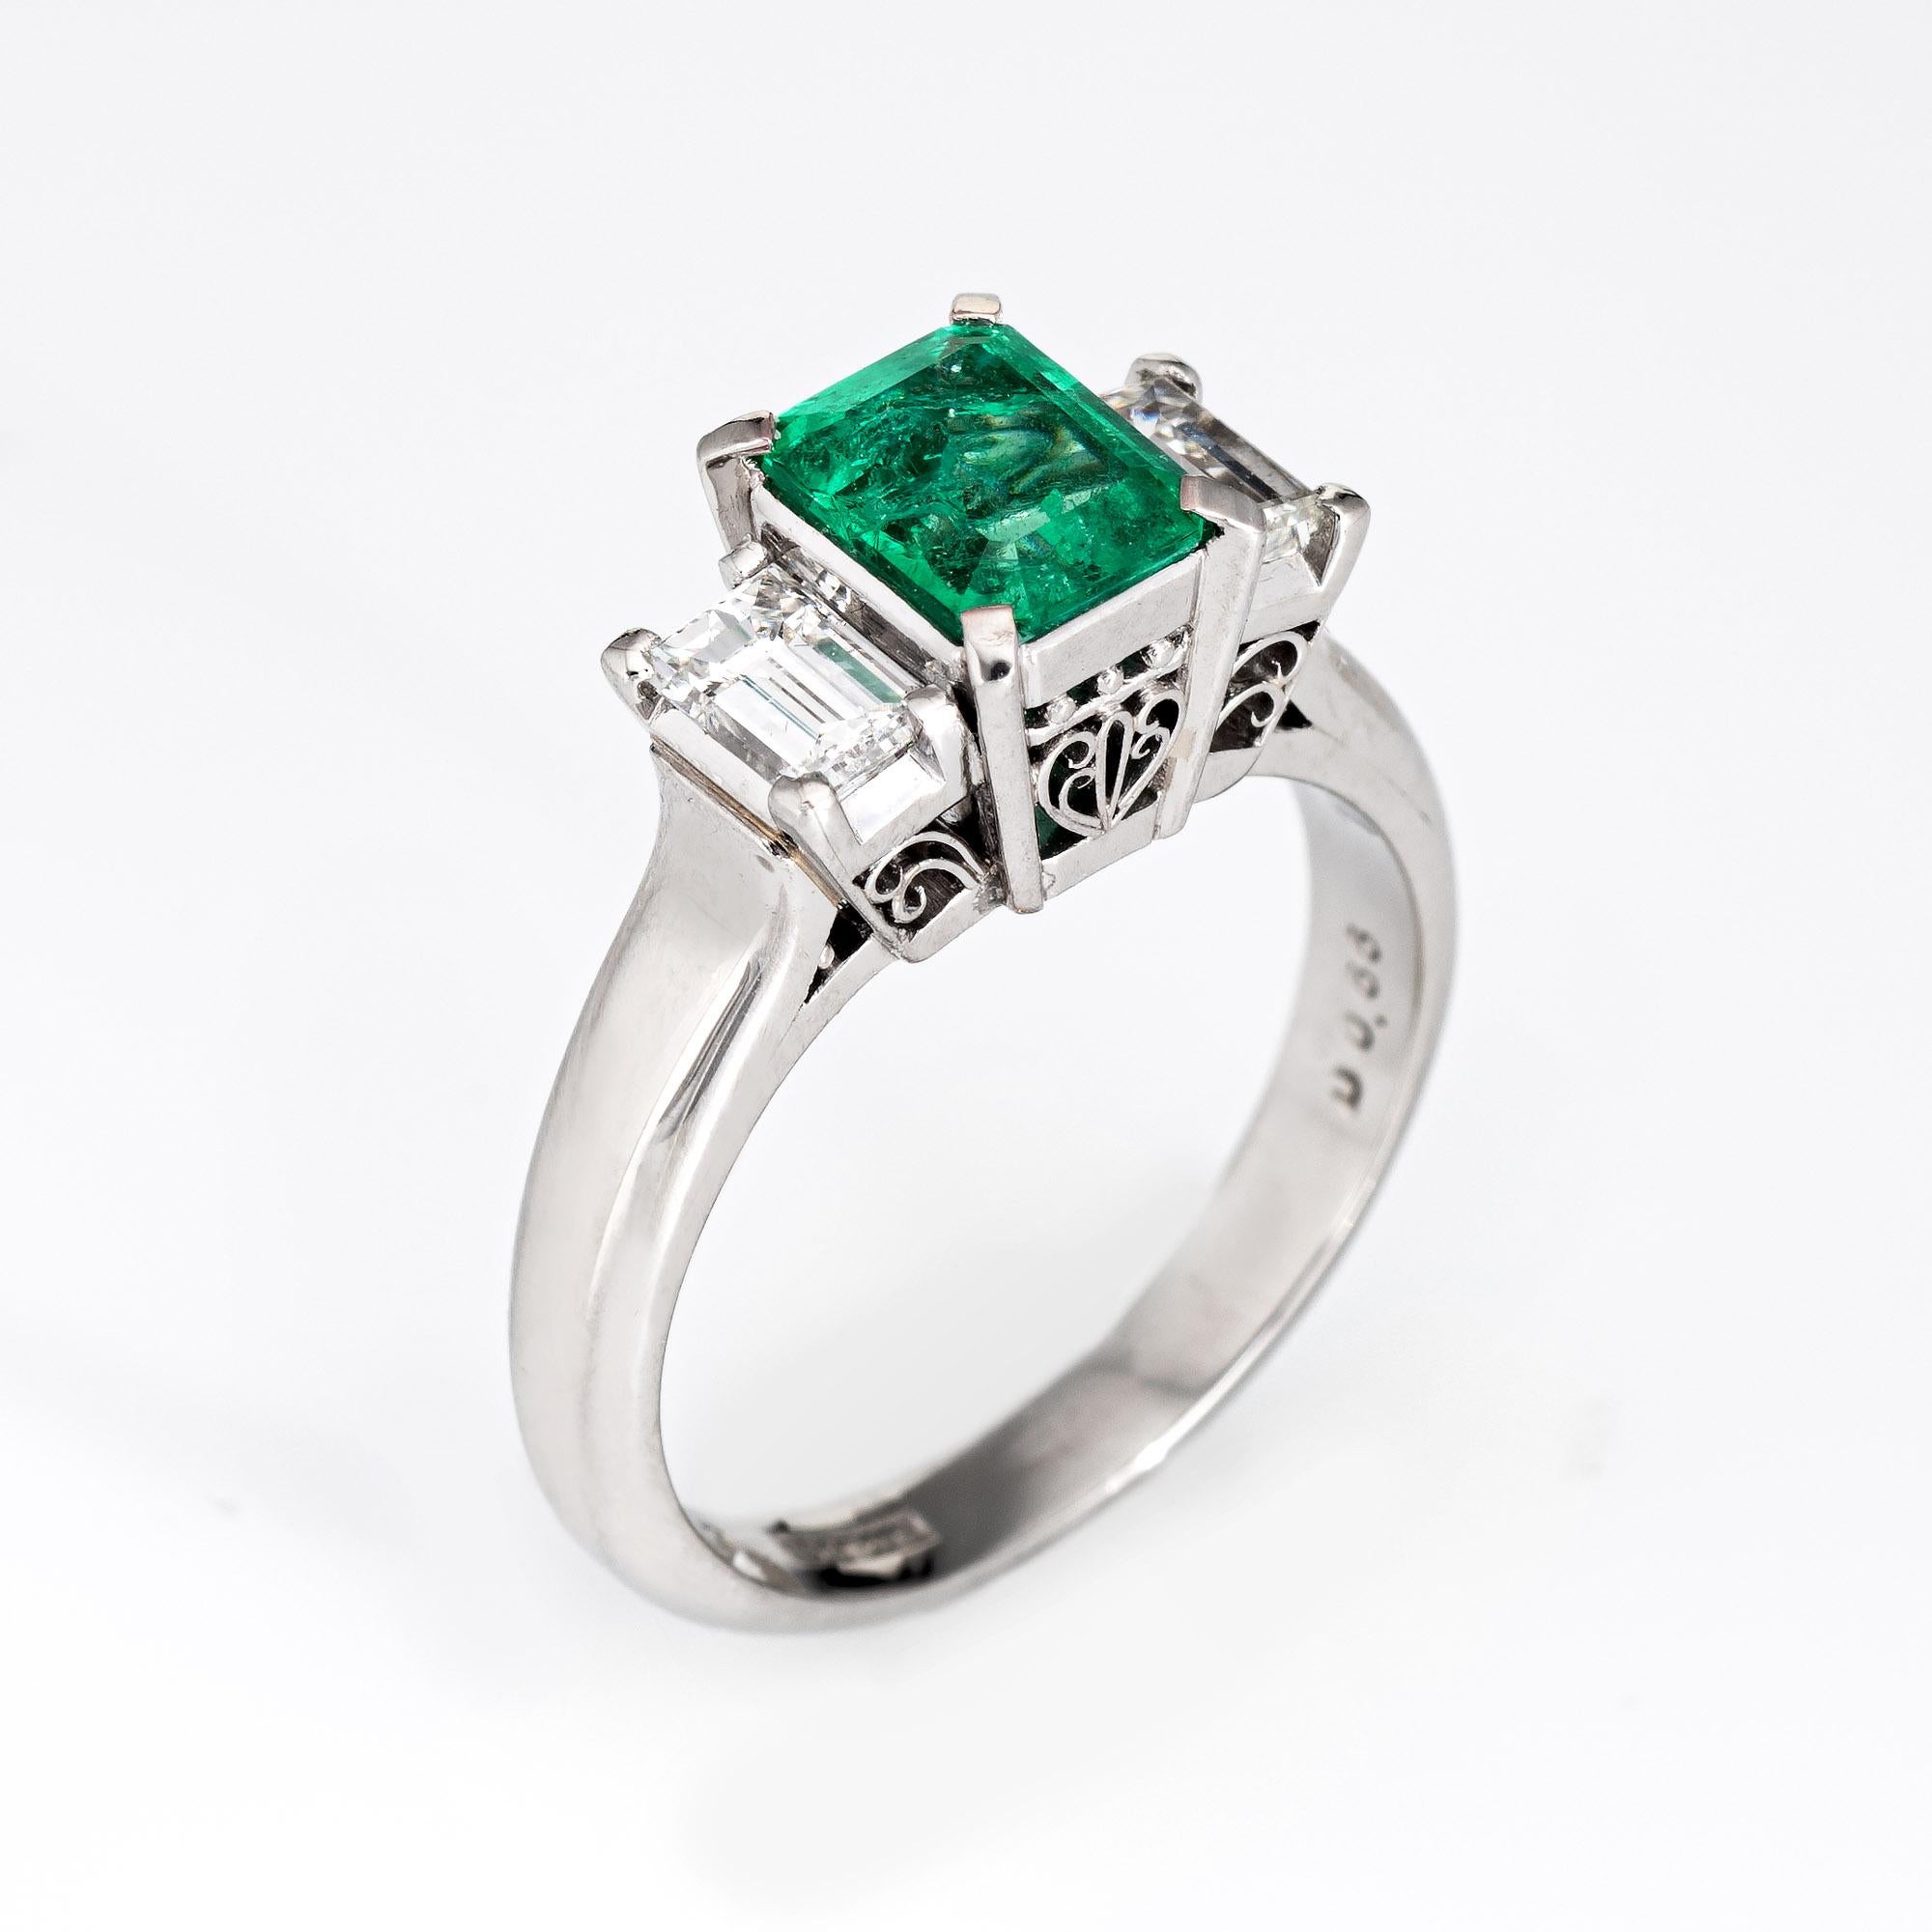 Stylish estate natural emerald & diamond ring crafted in 900 platinum. 

Emerald cut natural; emerald is estimated at 0.90 carats (6.47 x 5.12 x 3.74mm), medium green color, moderately included, good cut, Columbian origin, moderate clarity